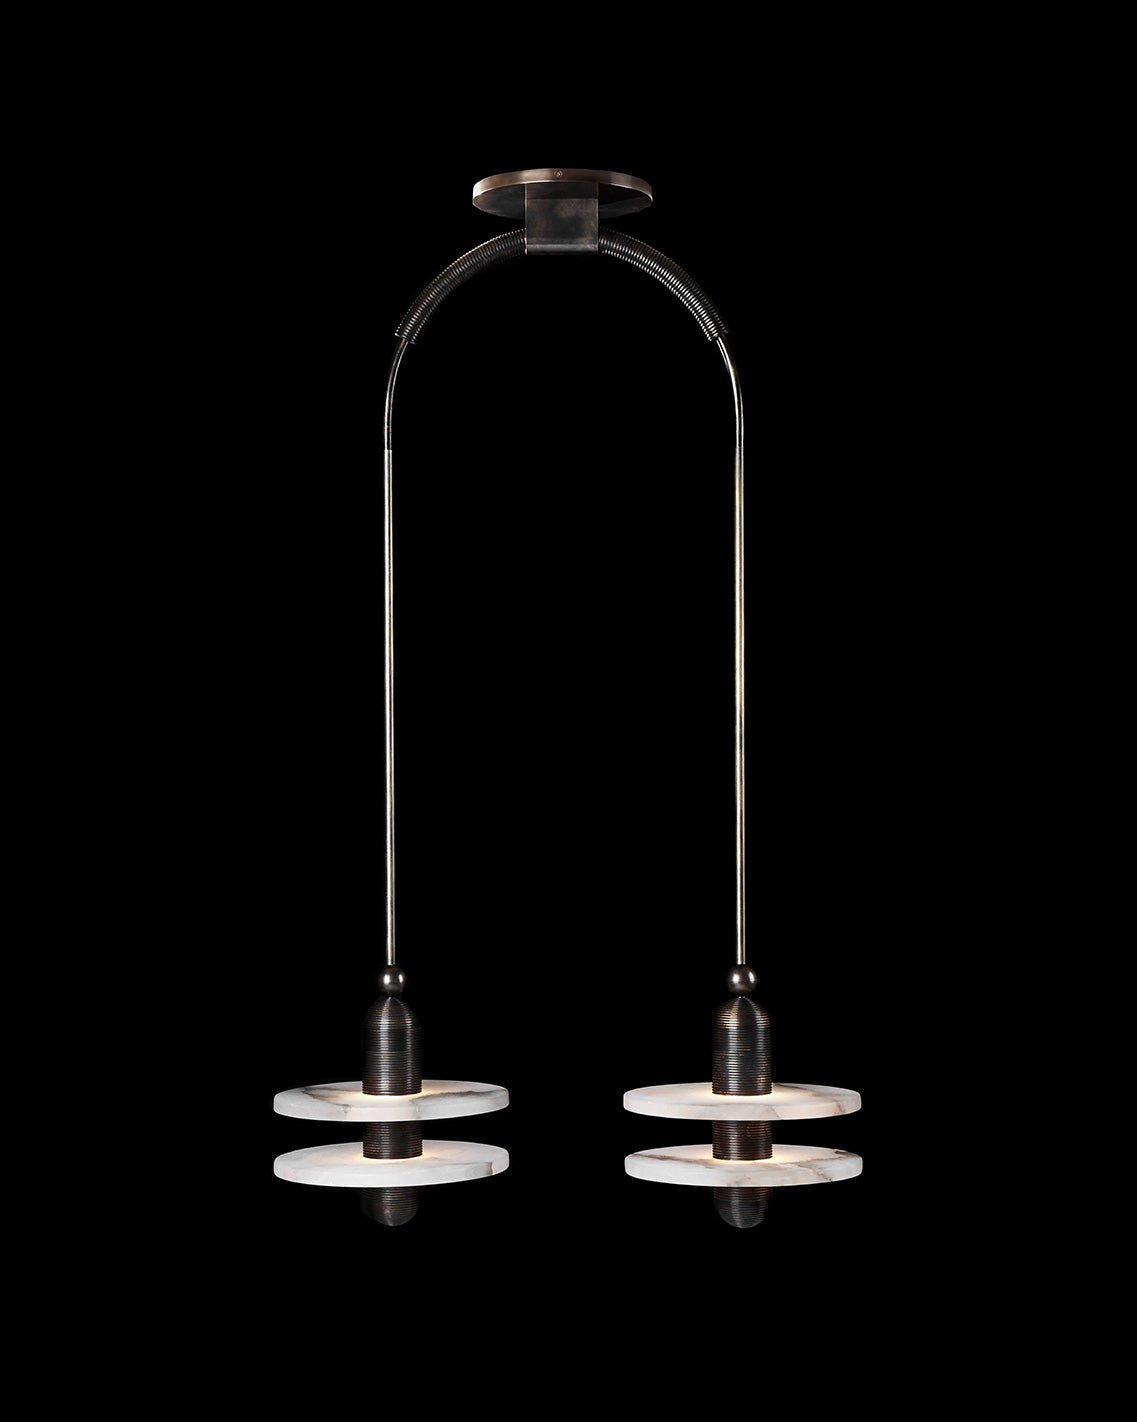 MEDIAN : 2 ceiling pendant in Oil-Rubbed Bronze finish hanging against a black background. 